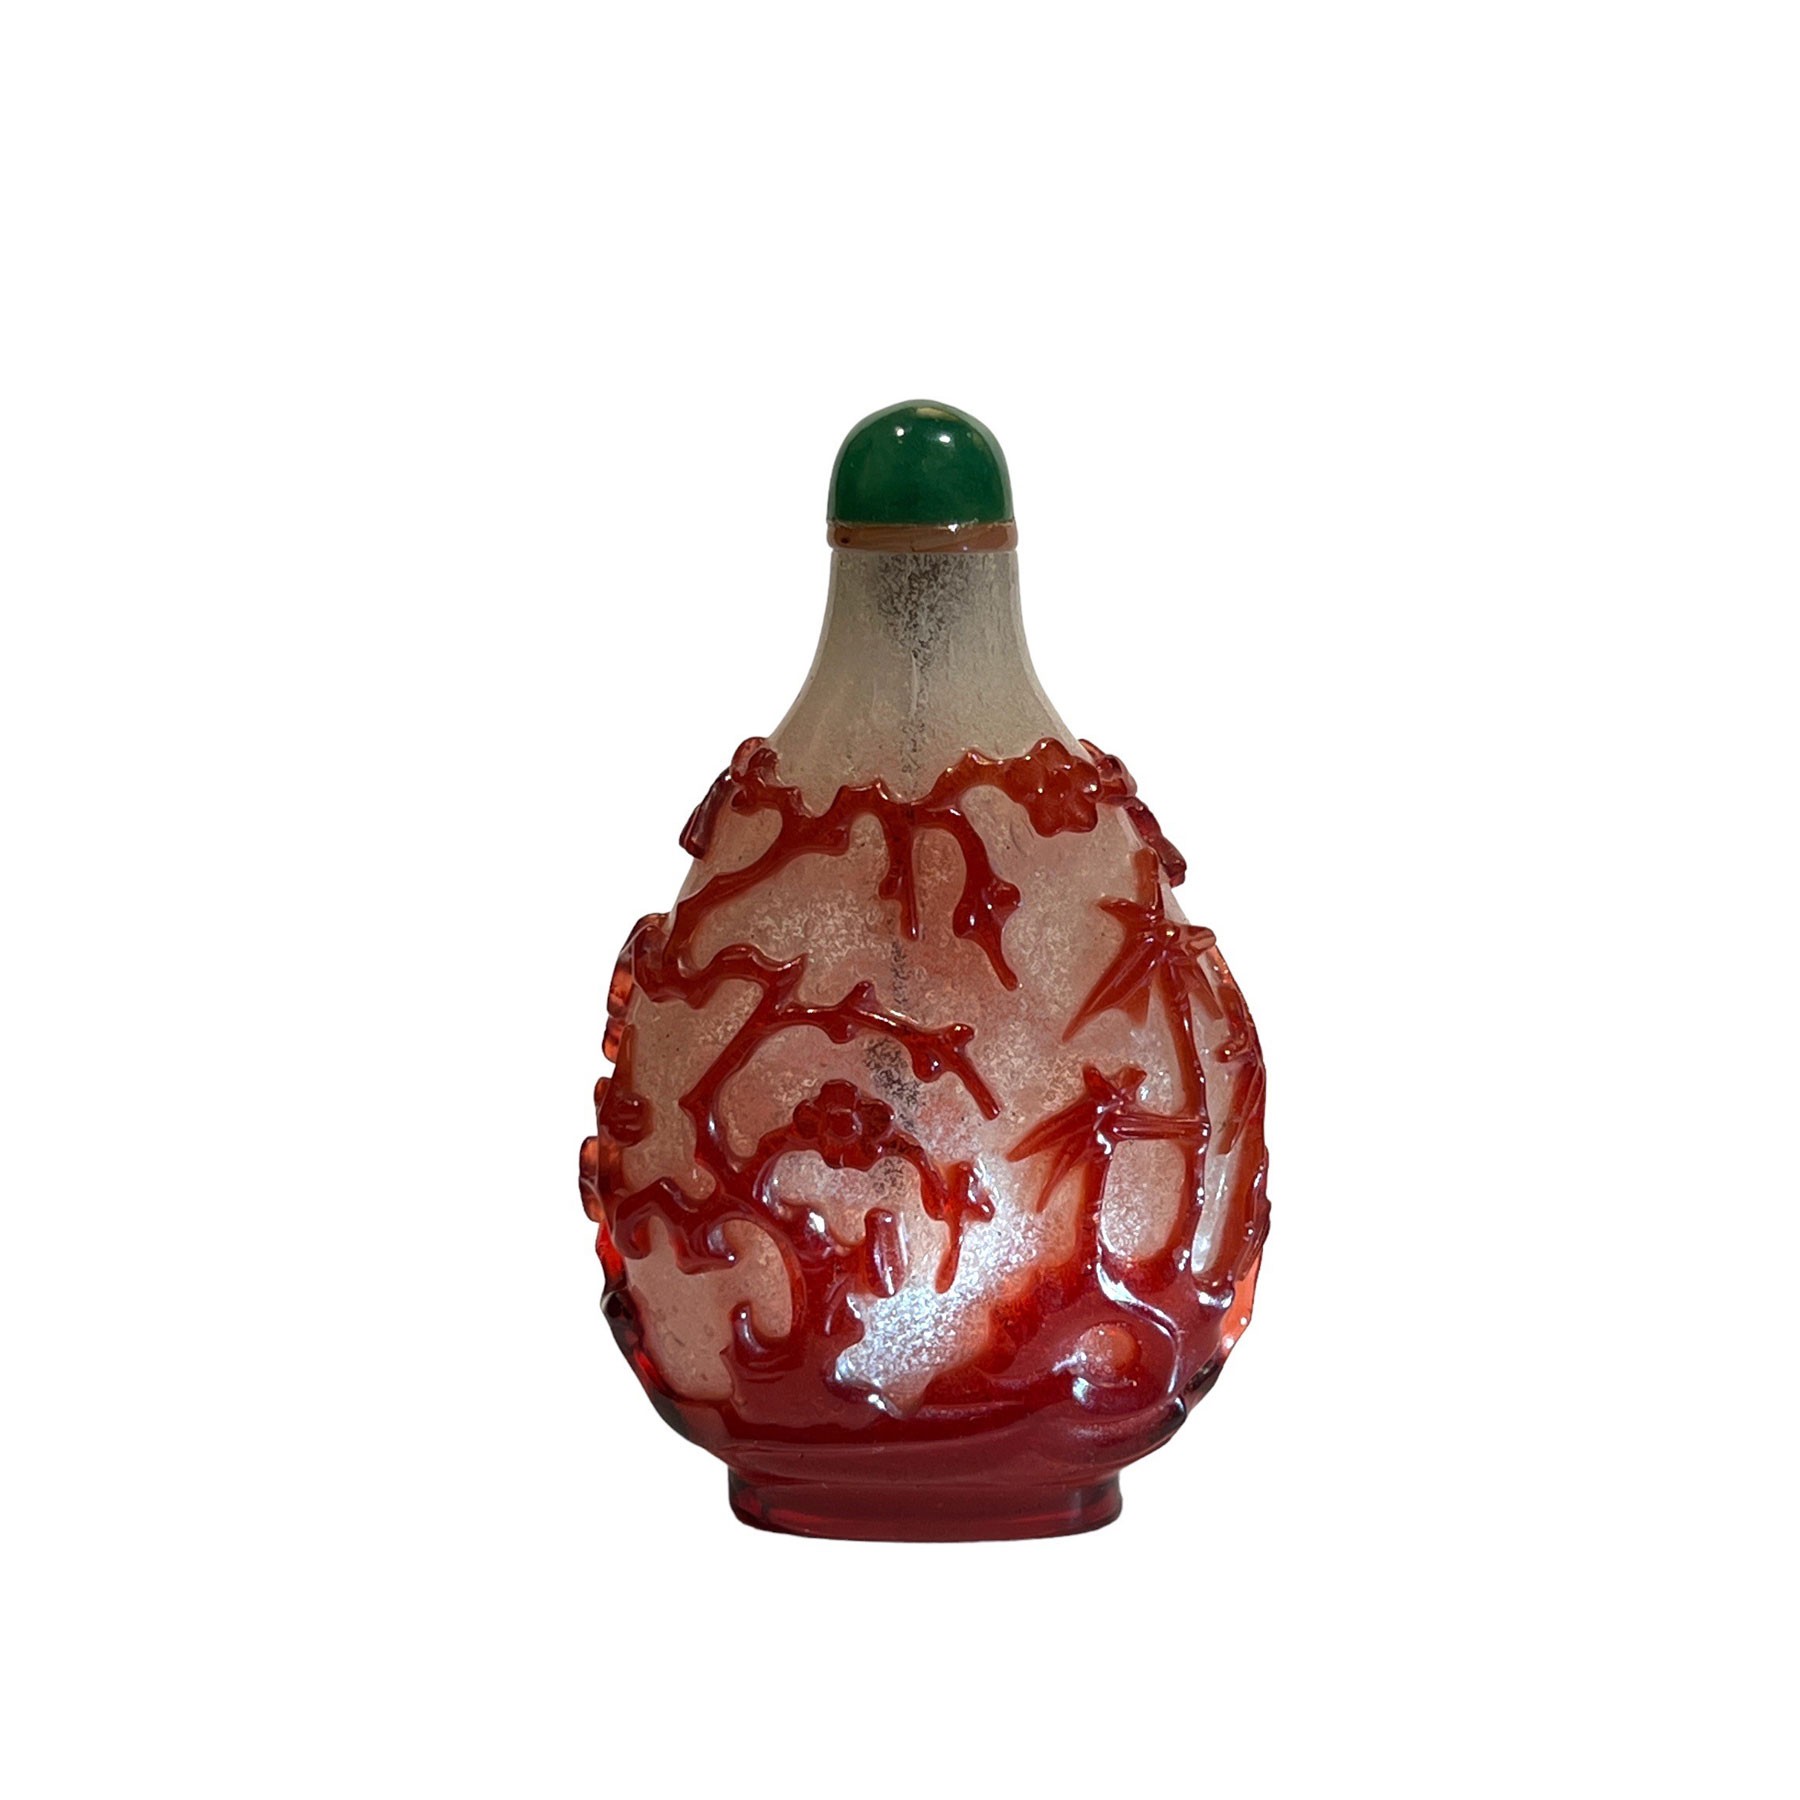 19th c, agate Snuff bottle with a silver mount from Maison Maquet -  Ref.105957